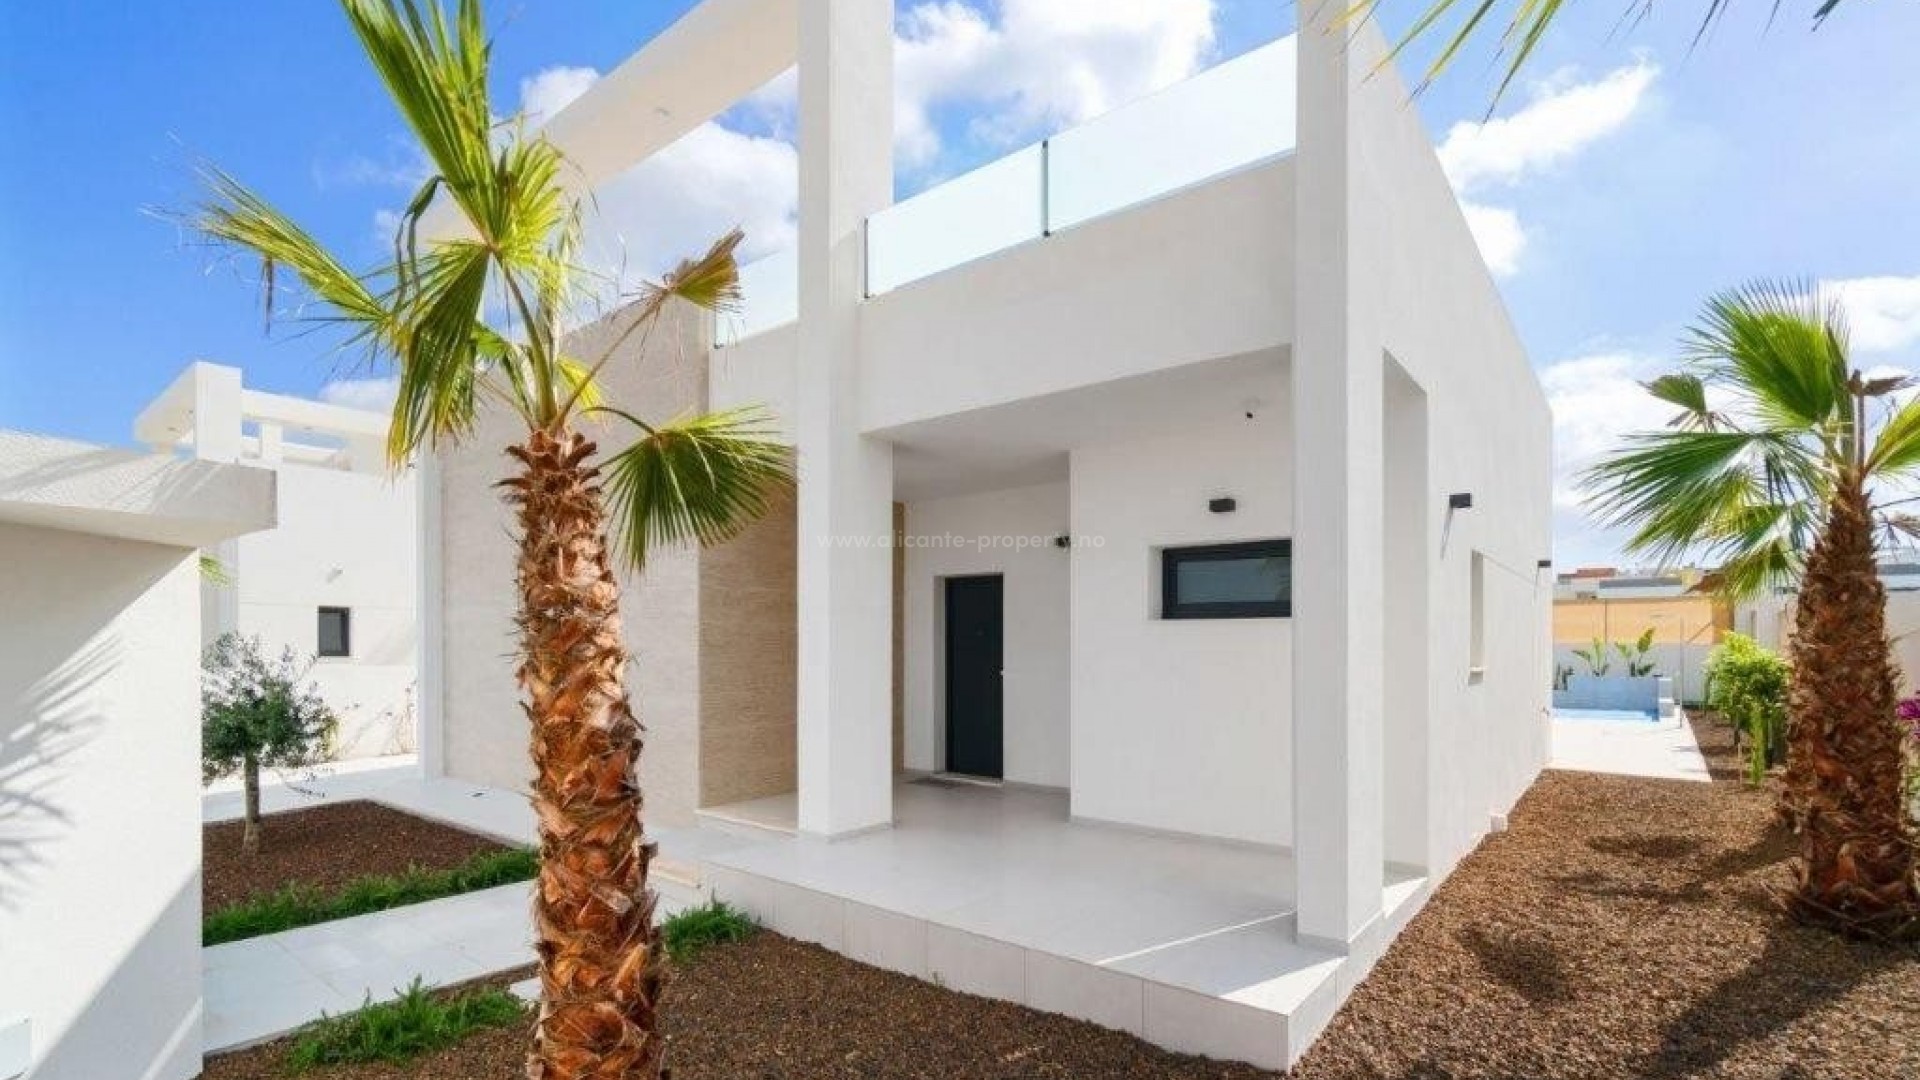 Modern villa/house in Benijofar, 3 bedrooms, 2/3 bathrooms, fantastic private pool, terrace and solarium. Golf at La Marquesa Club only 5 minutes away